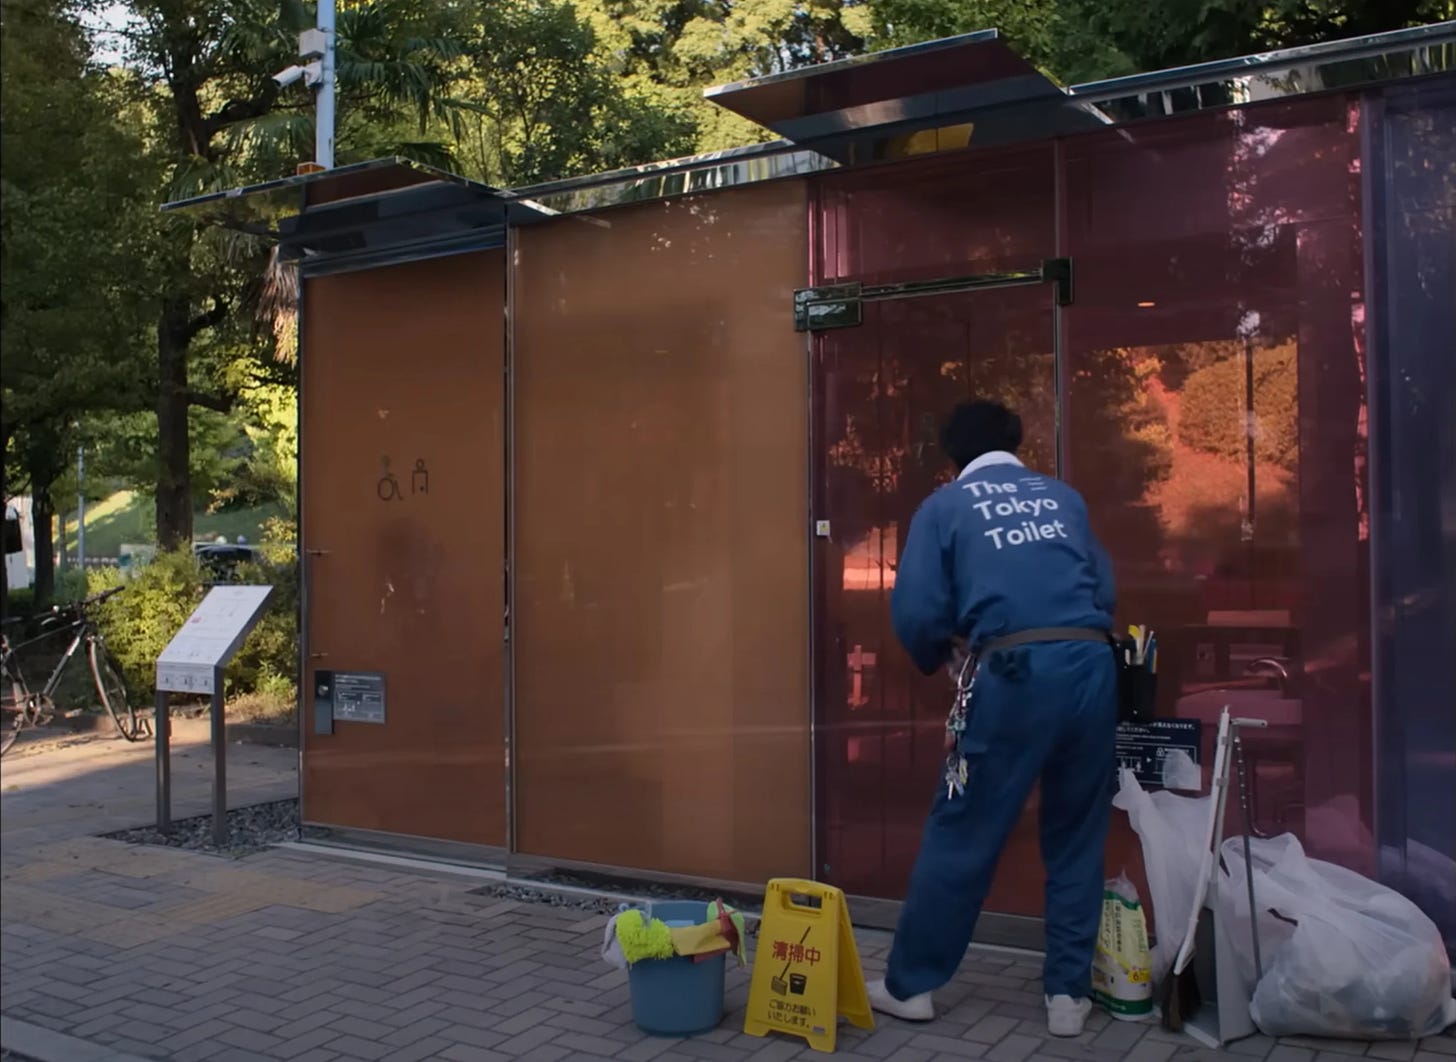 HIrayama in his blue uniform leans down to unlock the door to one of his restrooms, made up of large panes of colored glass.